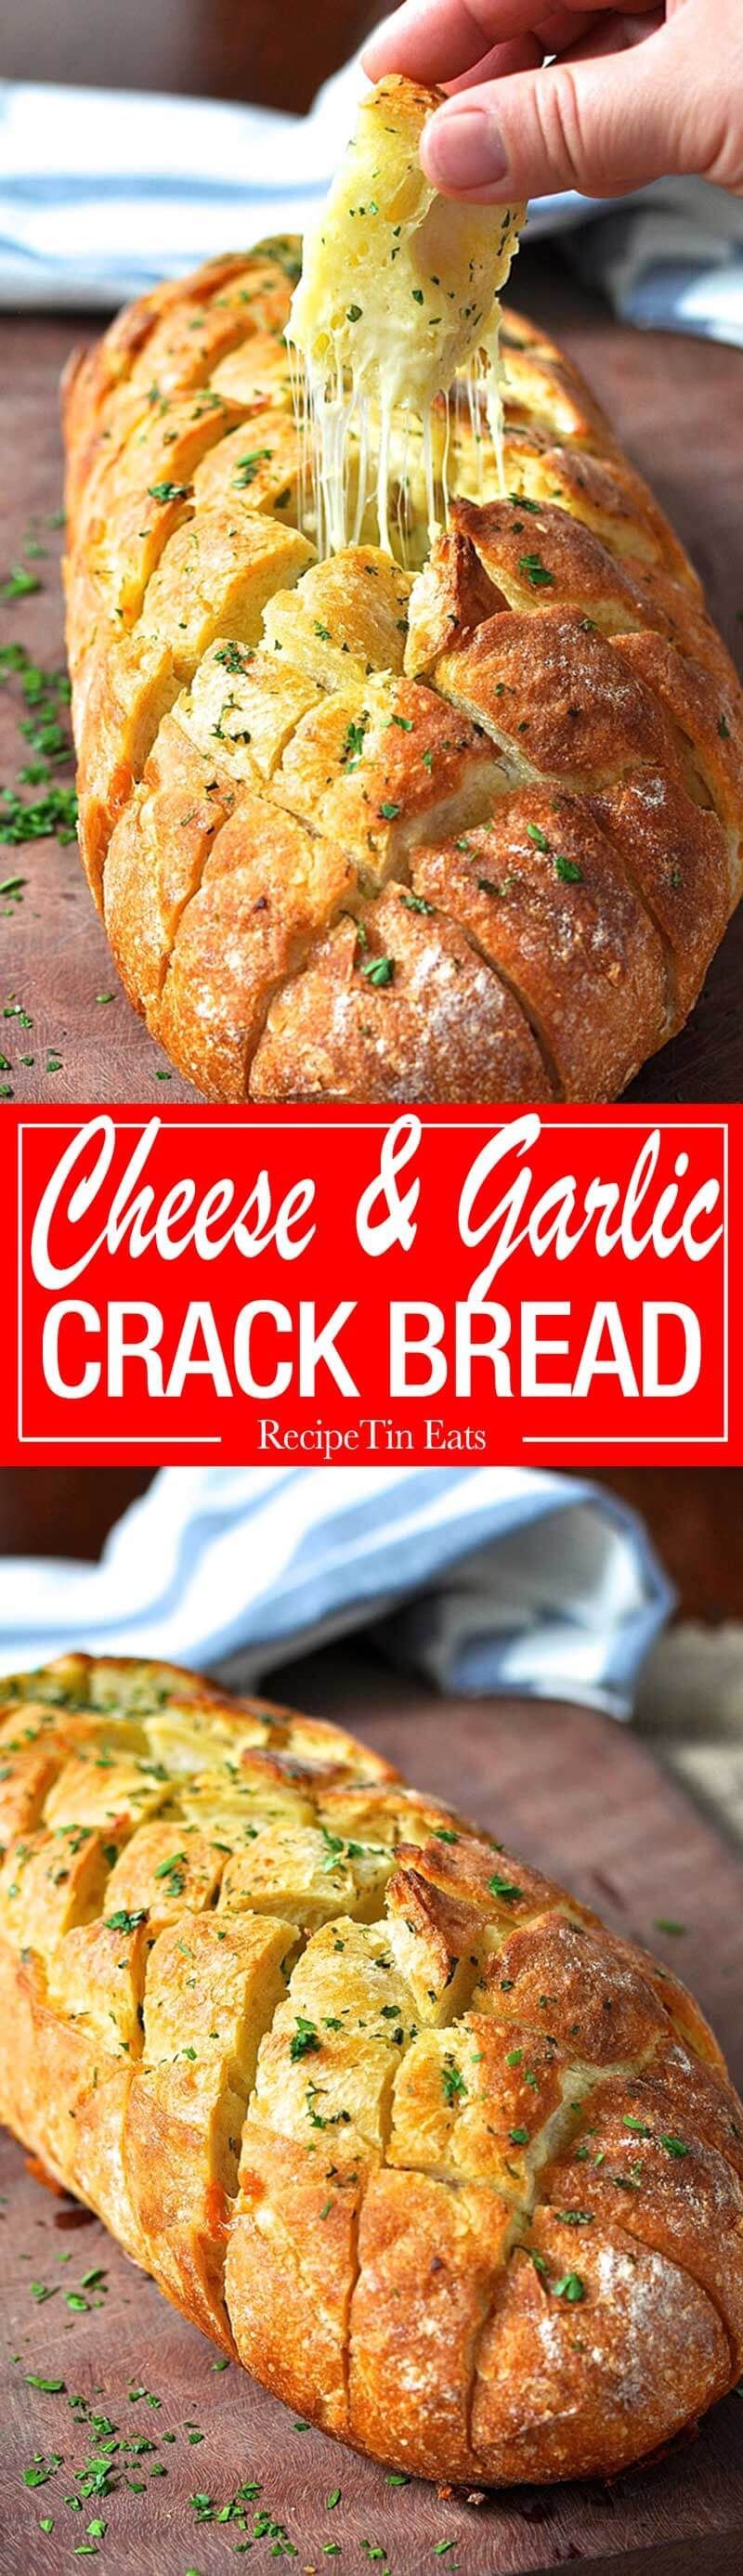 Cheese and garlic crack bread – this cheesy garlic bread is outta this world…